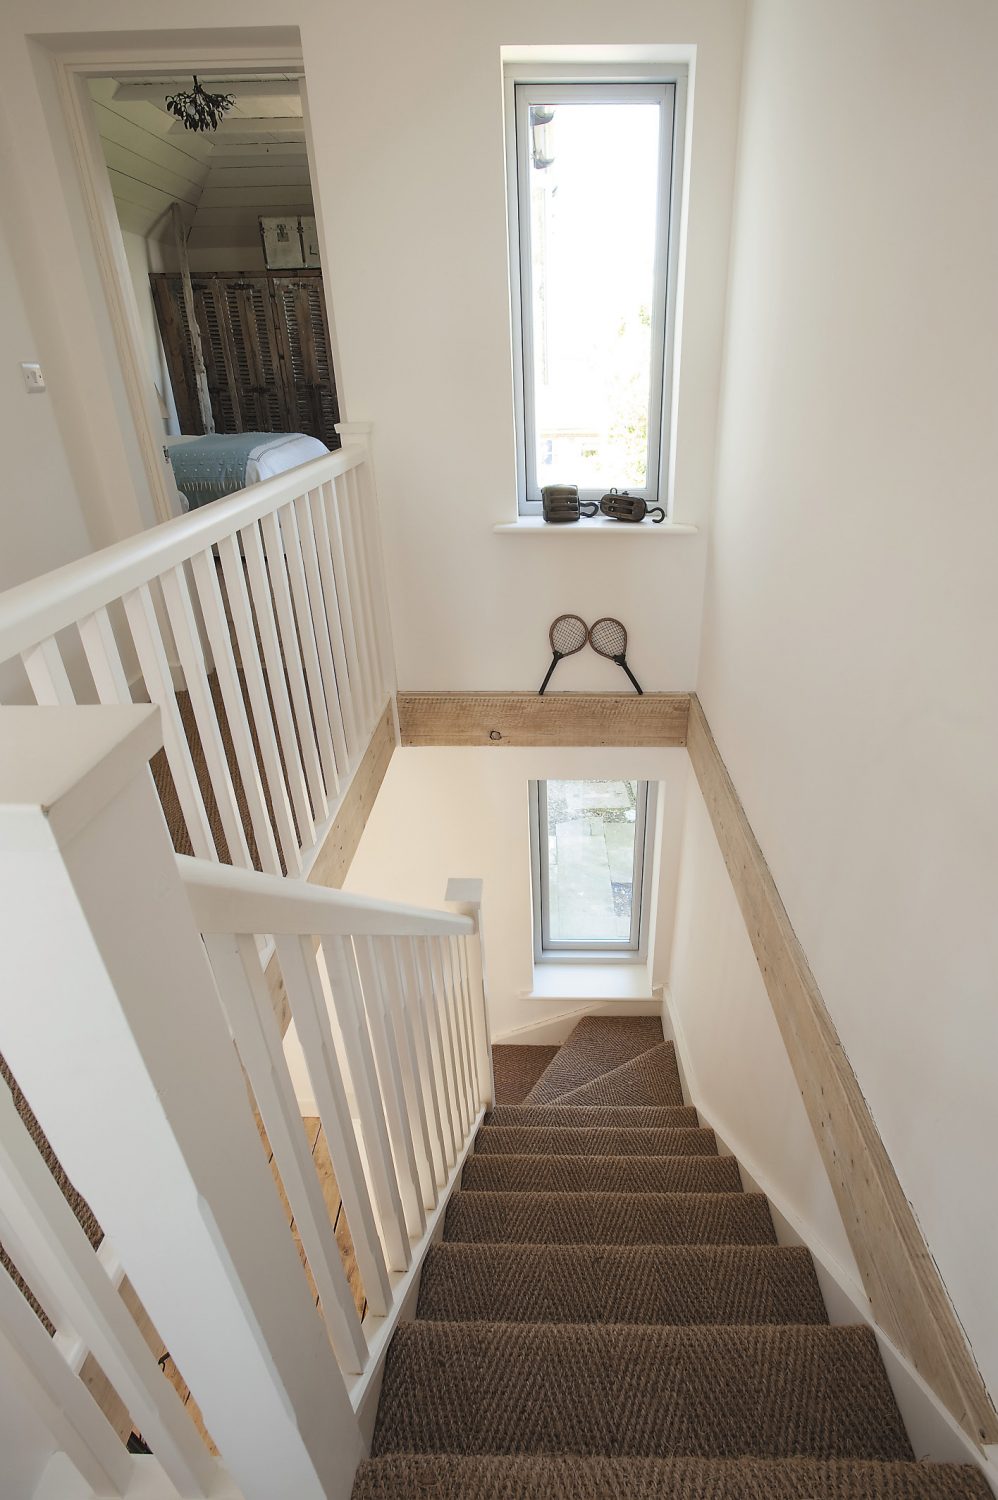 The staircase was repositioned to make the most of the light and available space; the hoists on the window ledge were probably used originally by local fishermen. The seagrass was sourced from Avalon Flooring